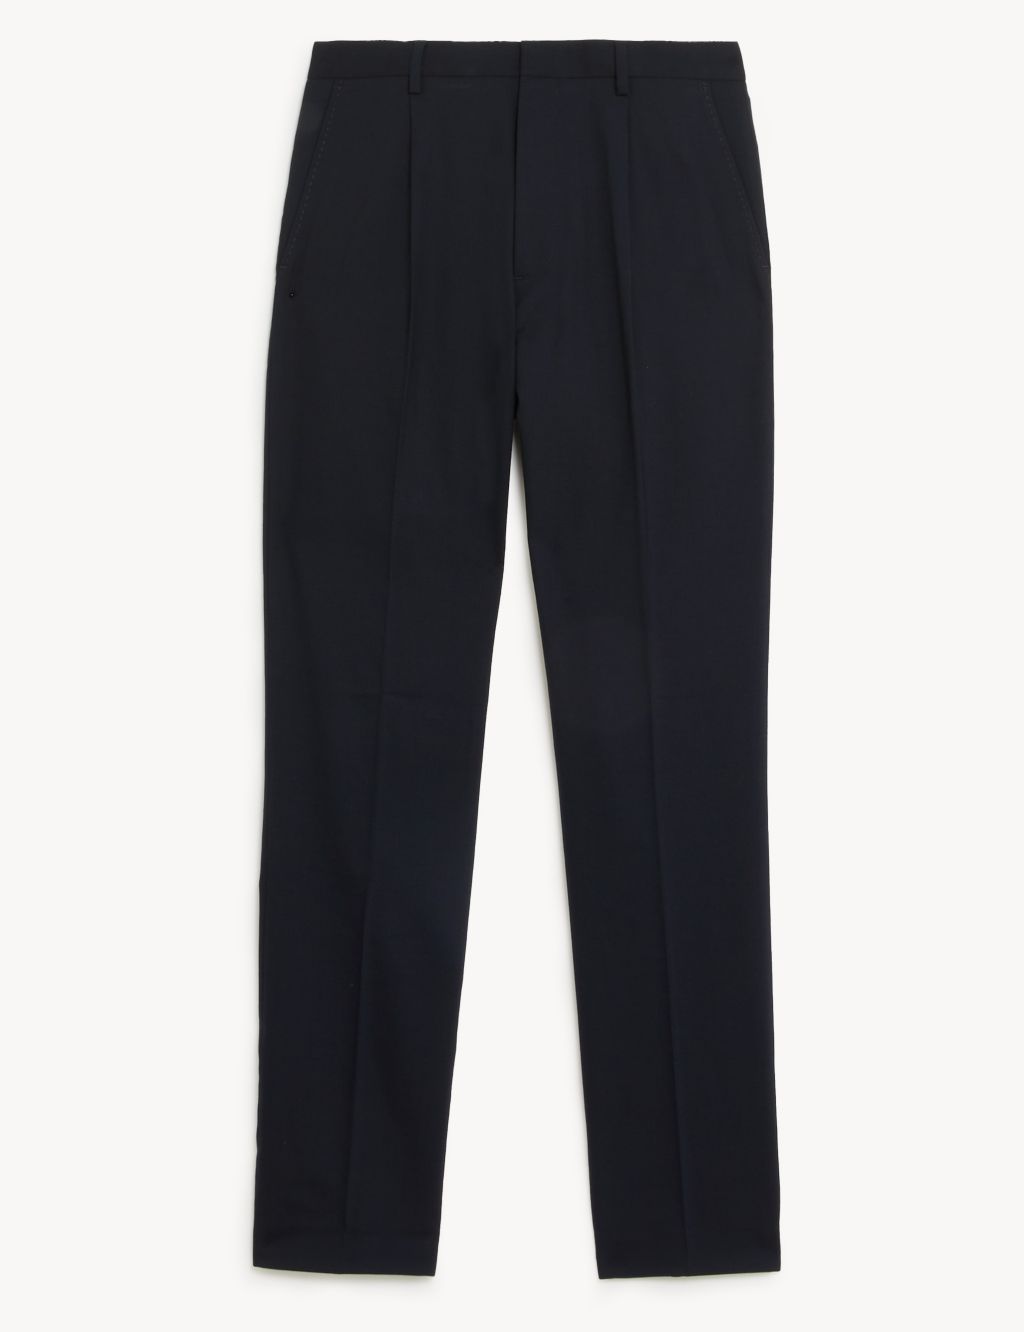 Regular Fit Wool Blend Trousers image 6